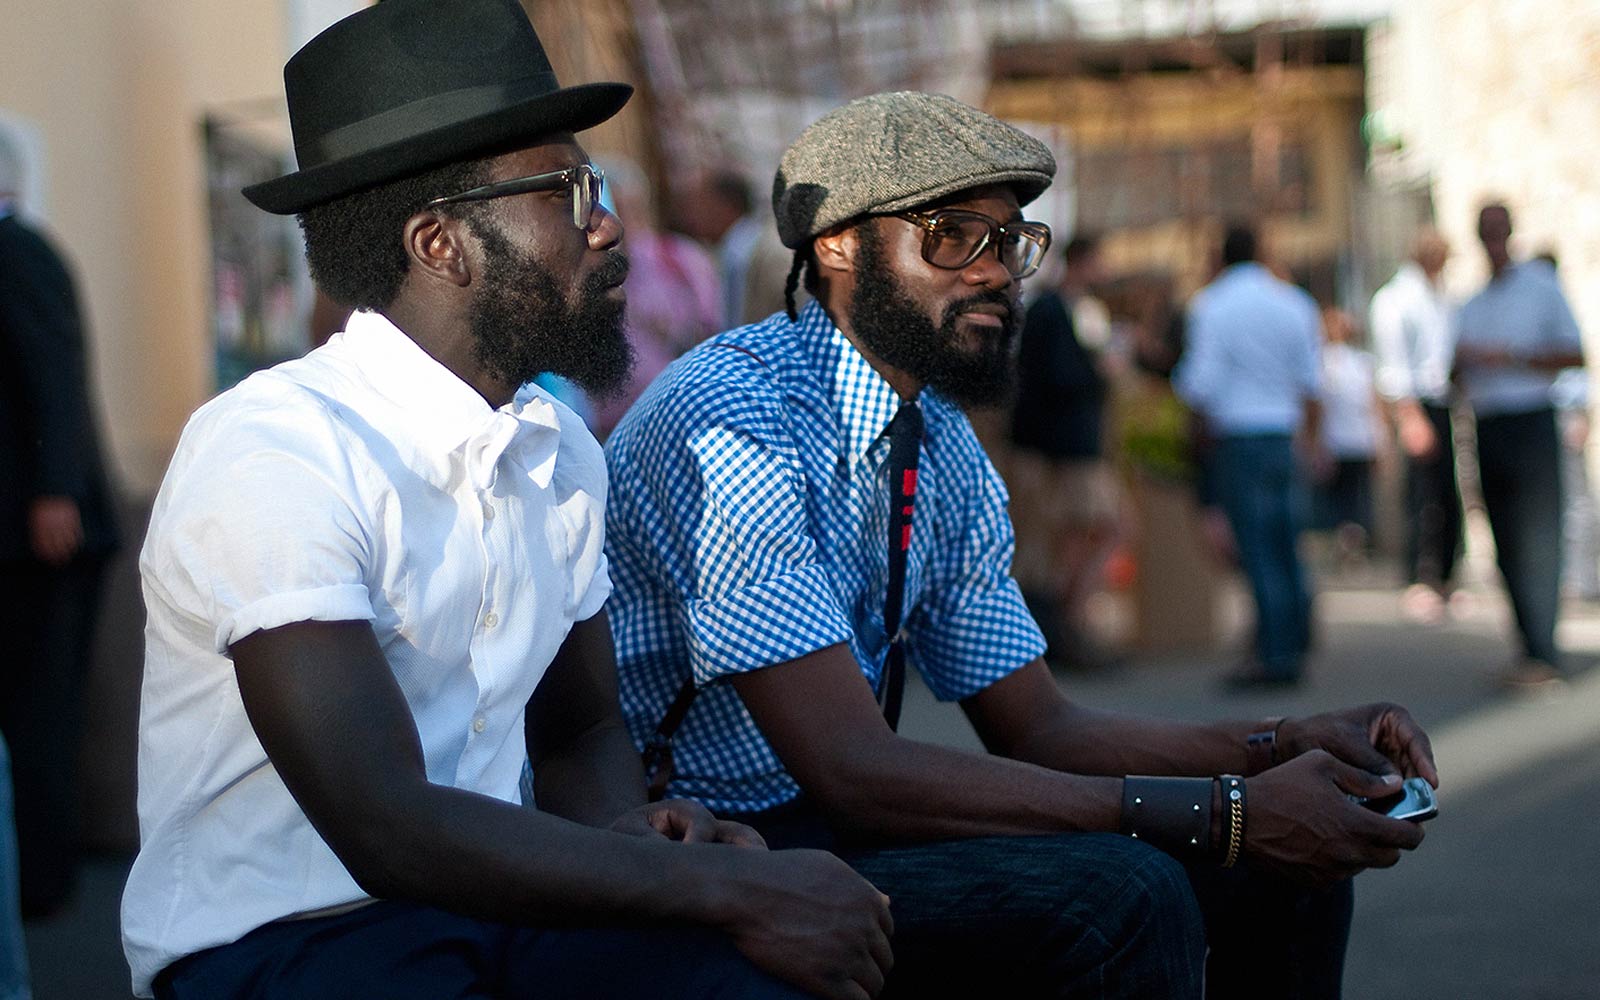 7 Hats to Boost Your Street Style - The GentleManual | A Handbook for